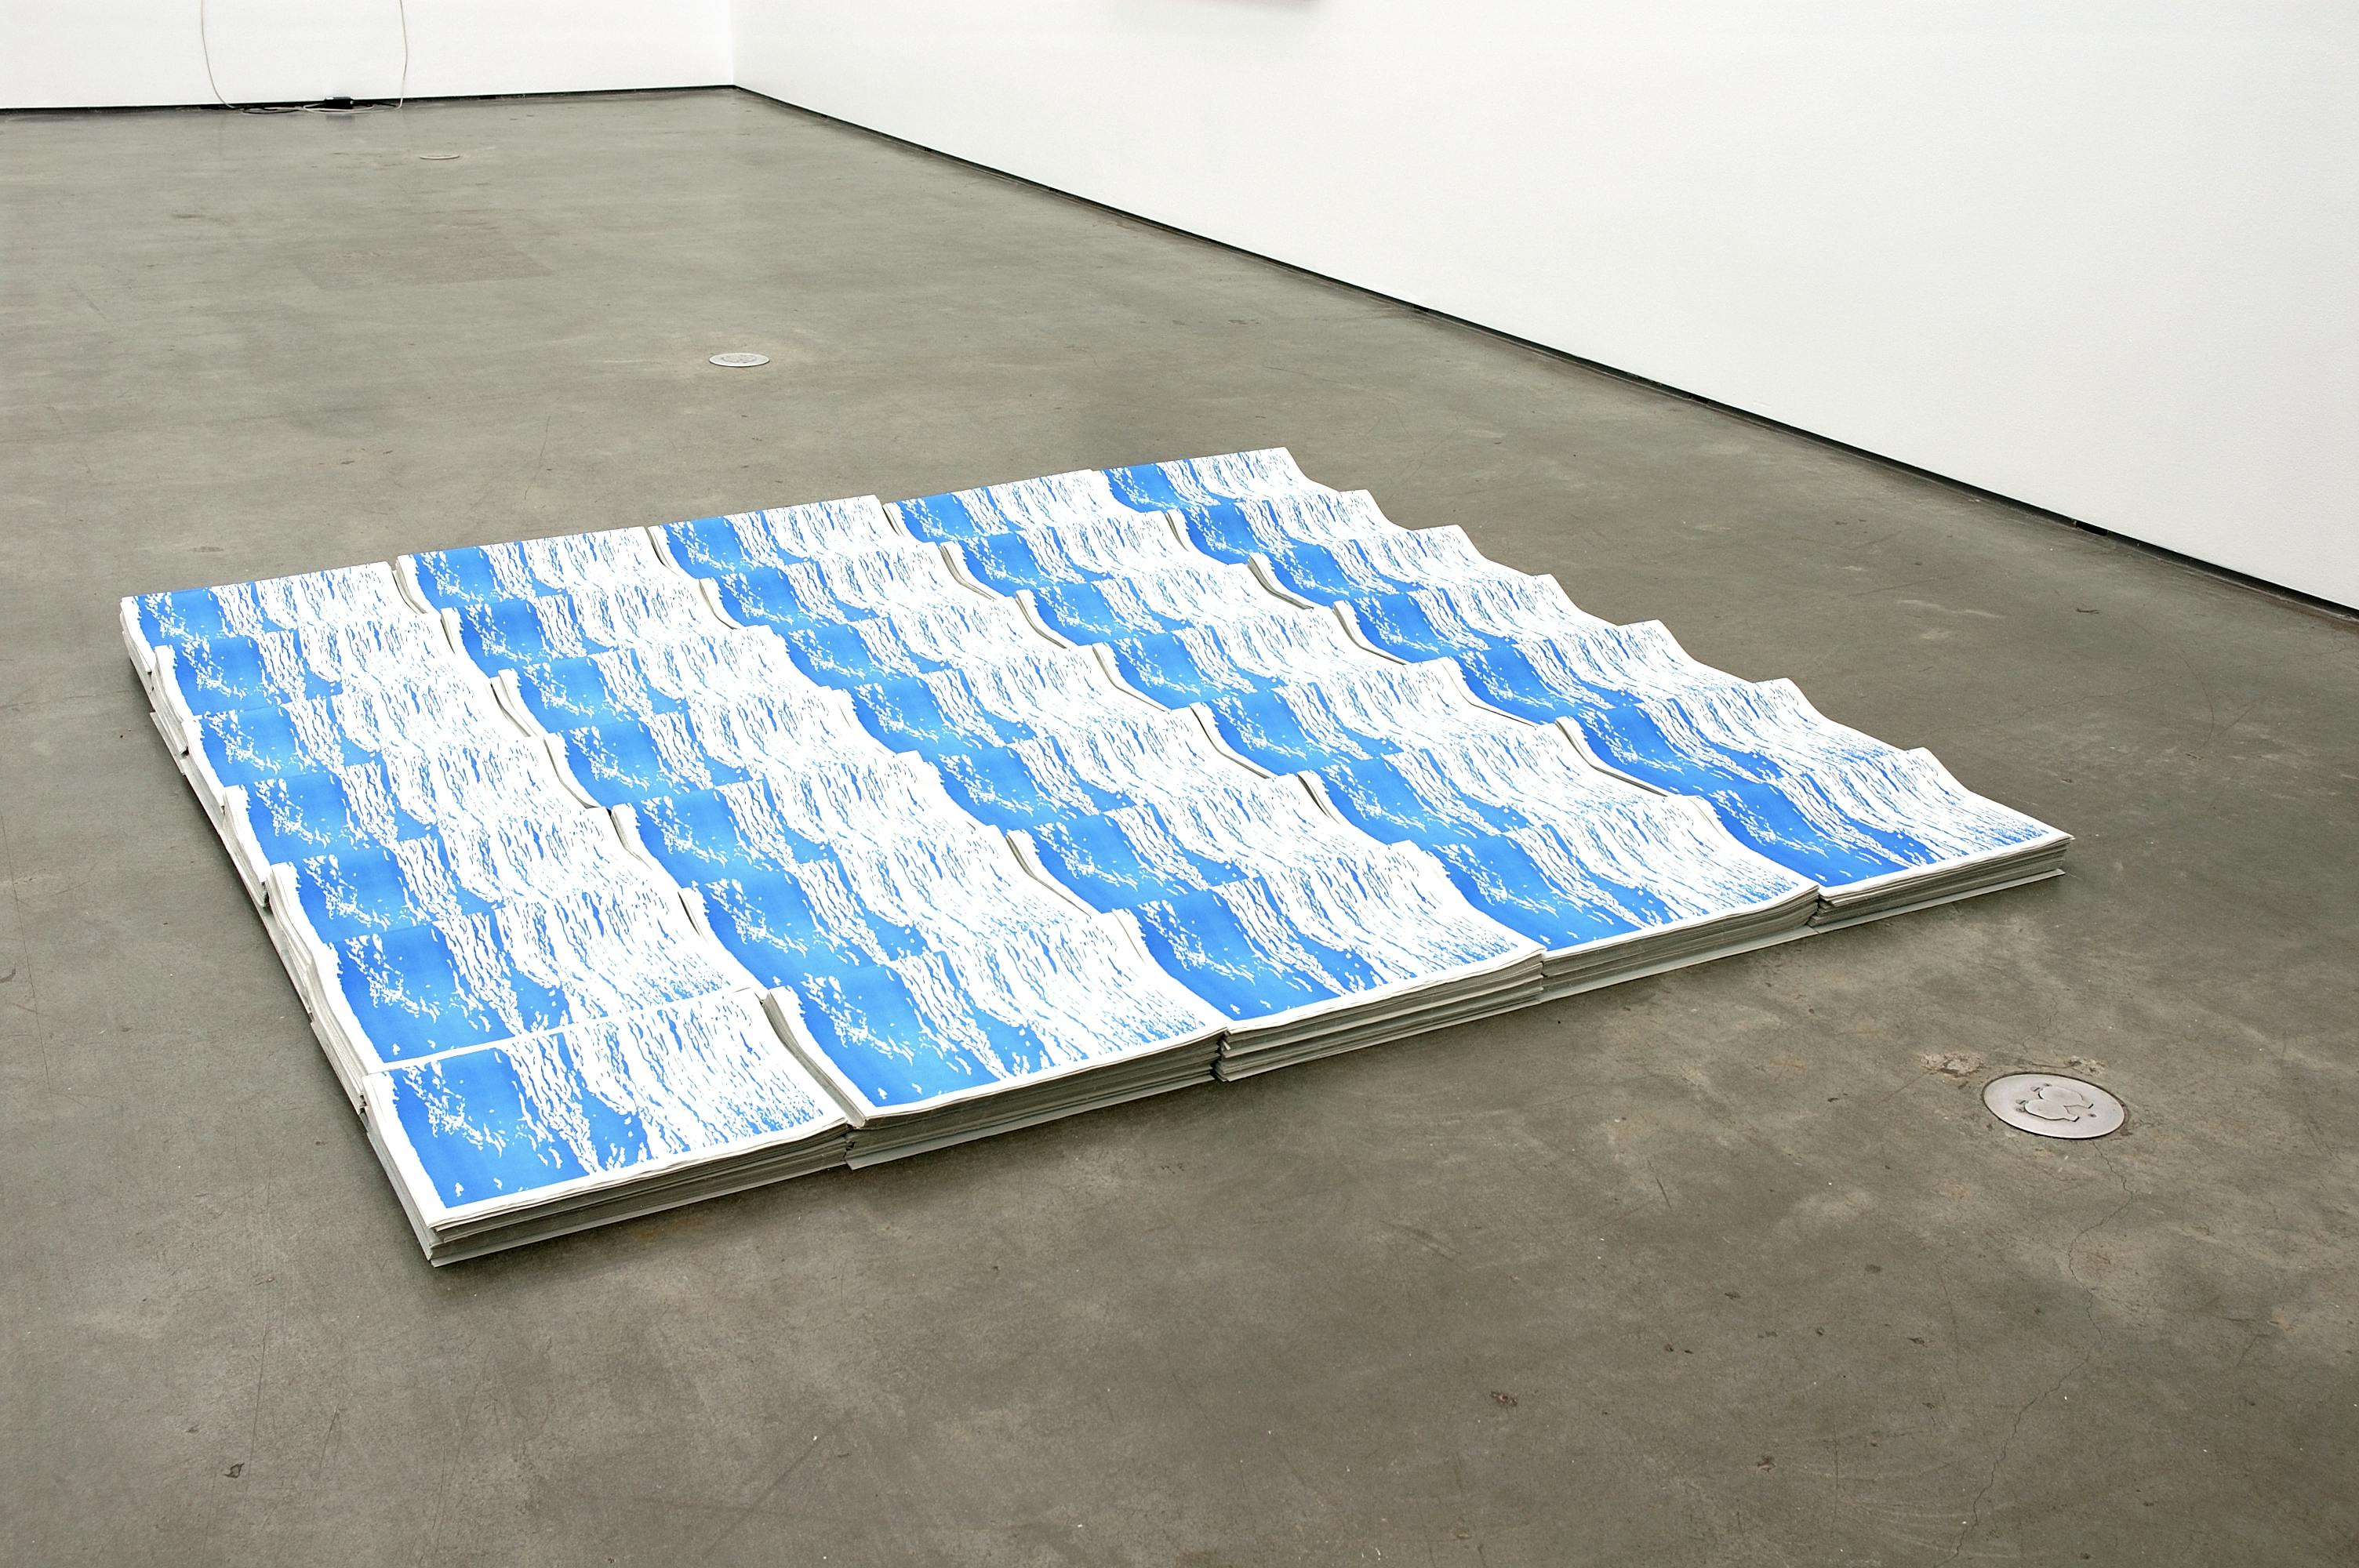 7 times 5 stacks of brochures are placed on the grey gallery floor. The brochures are made of newsprint paper. Repetition of both their shape and blue and white cover image resembles water waves. 